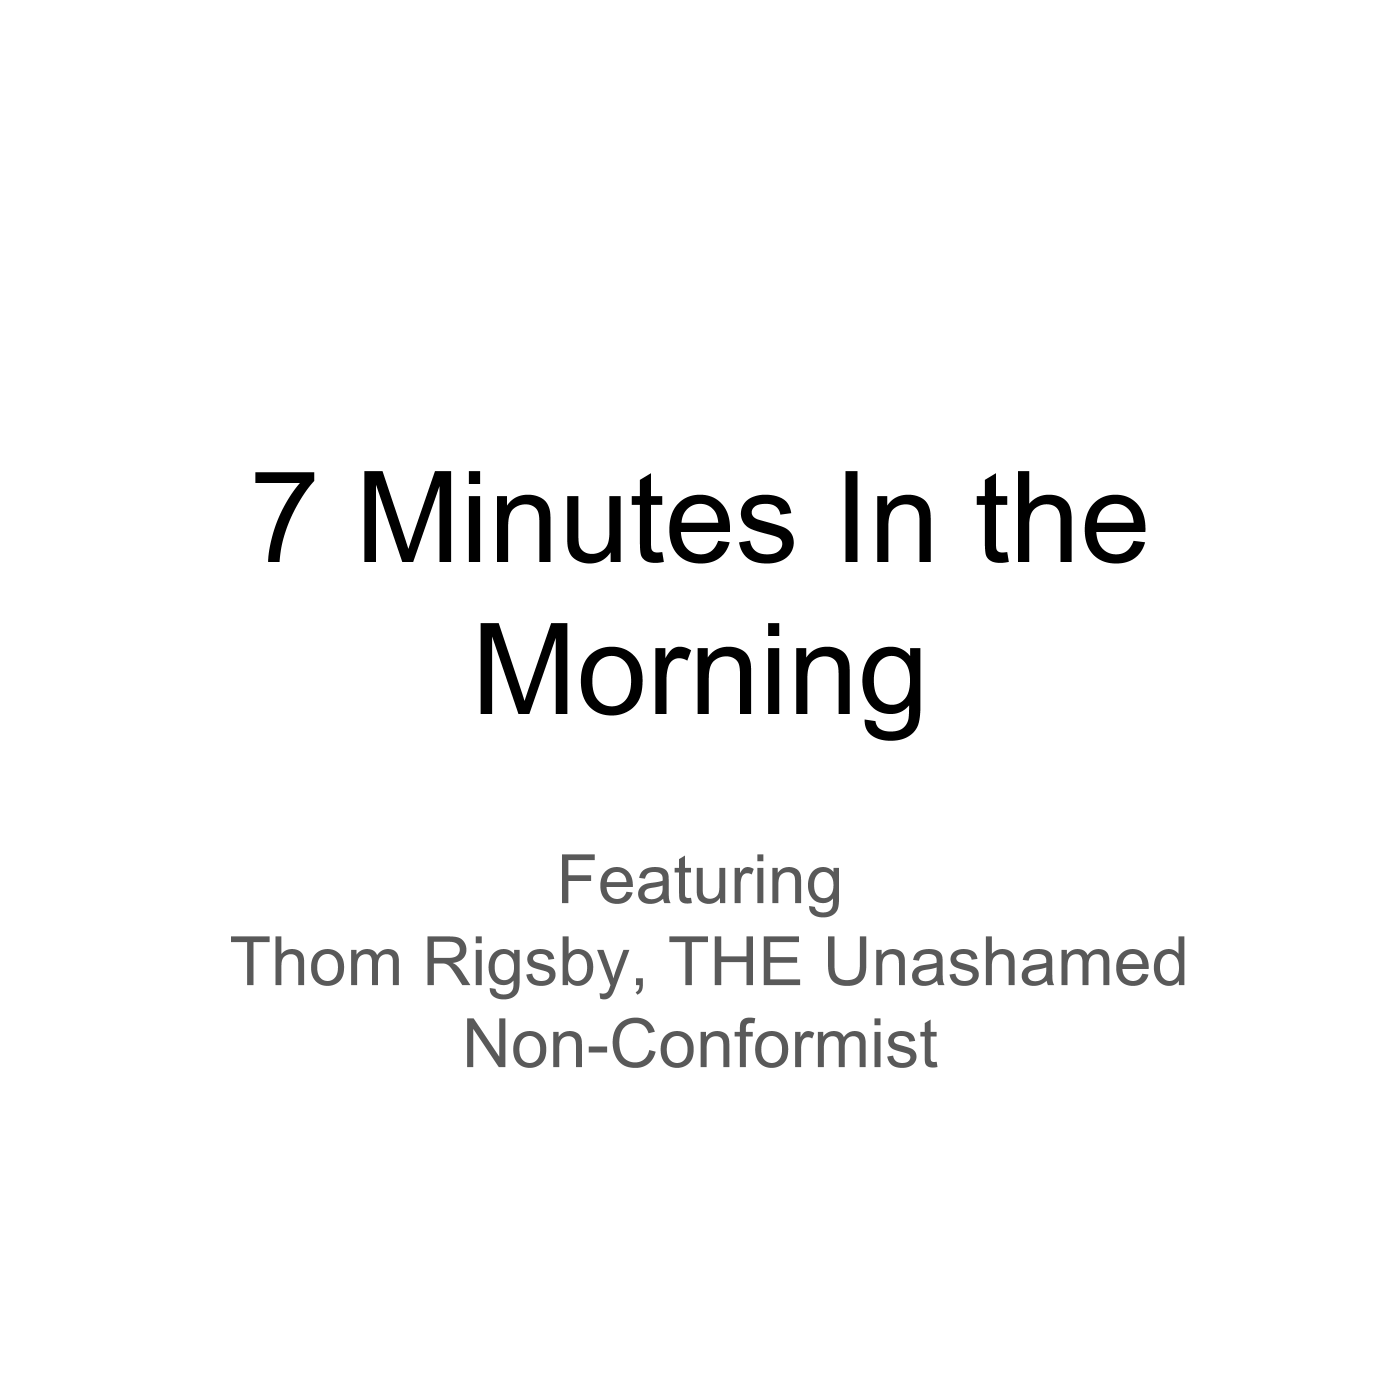 7 Minutes in the Morning